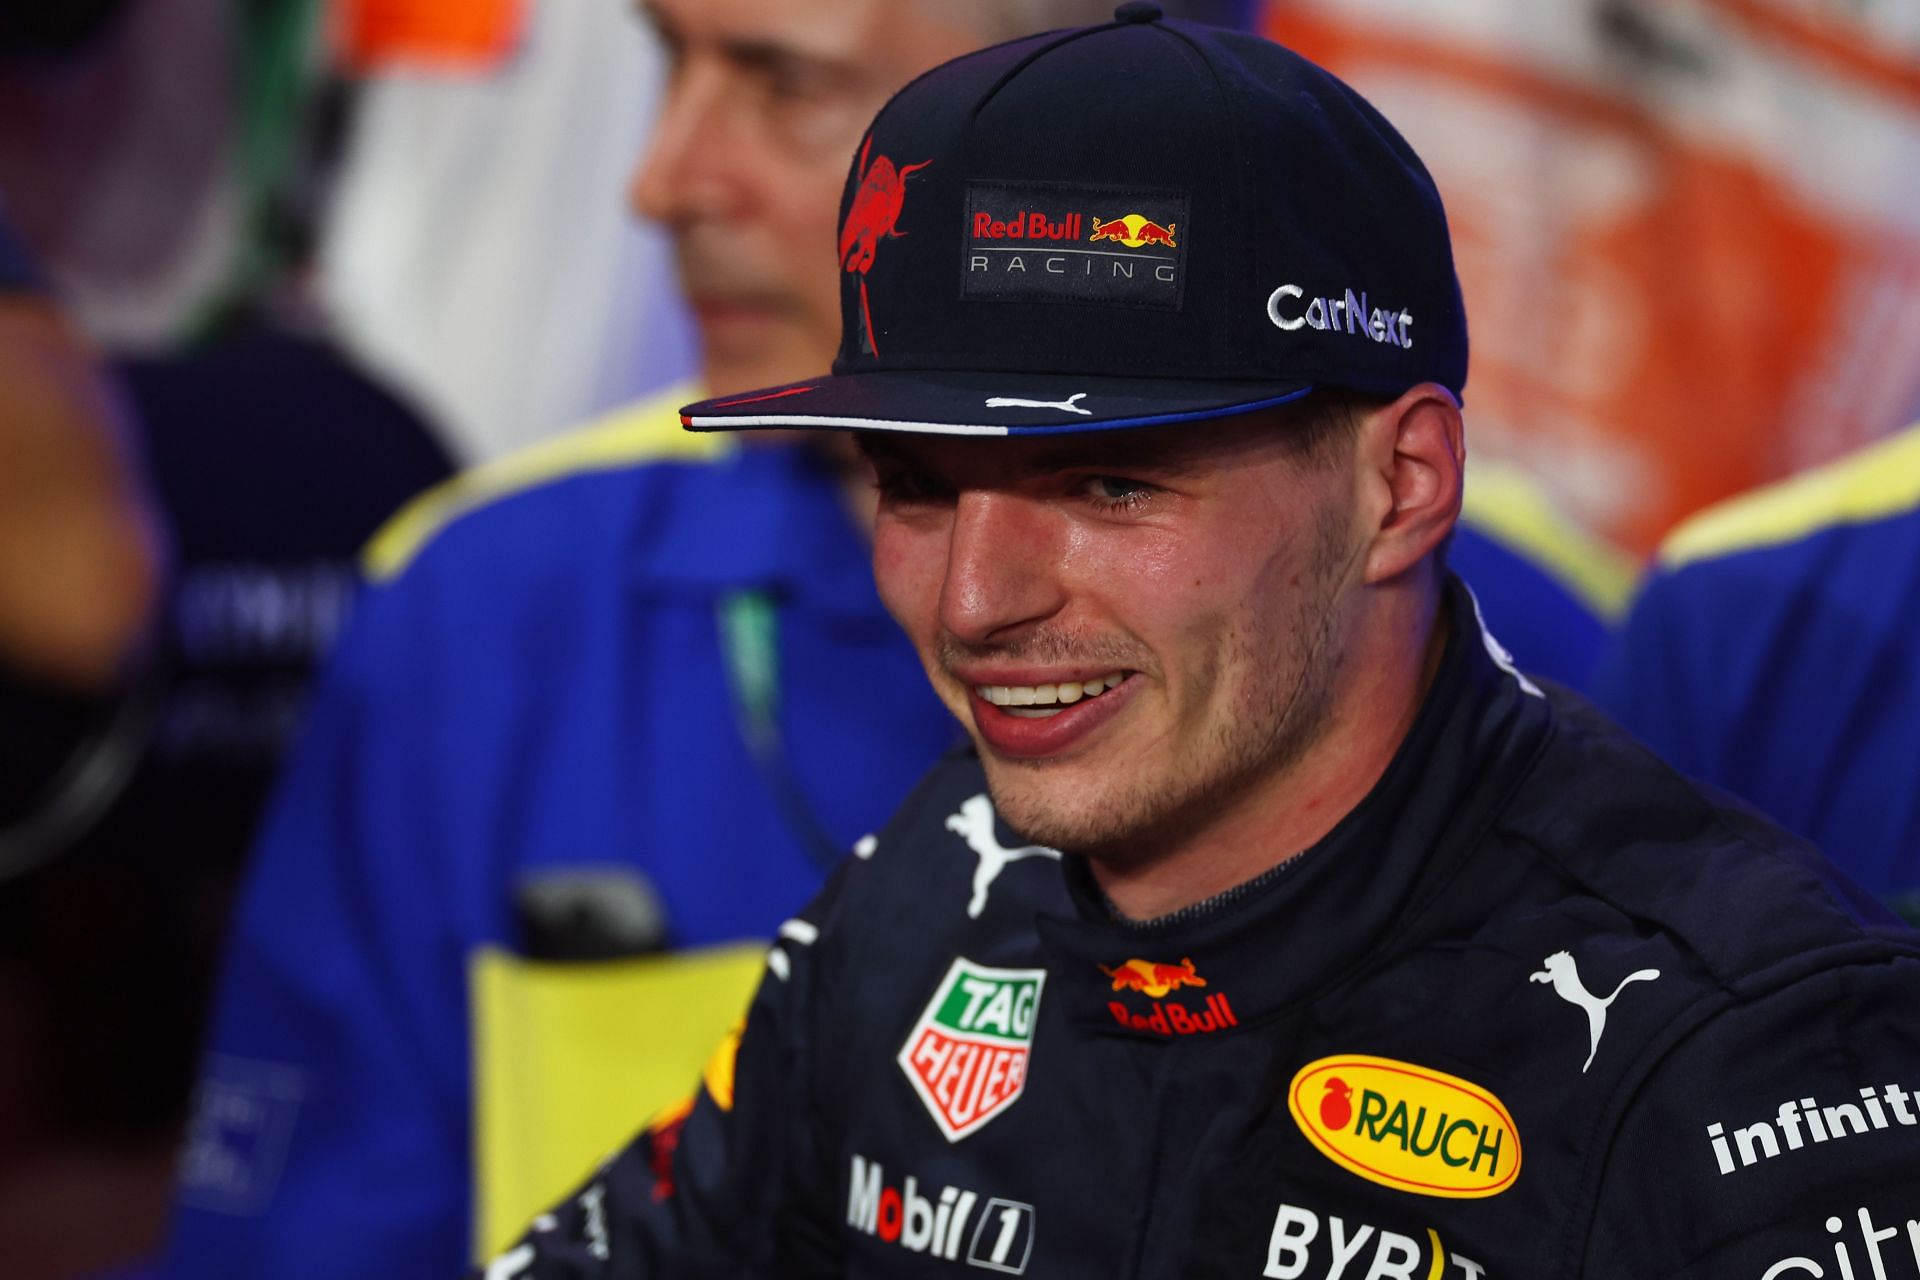 Max Verstappen has faced his share of criticism through the years